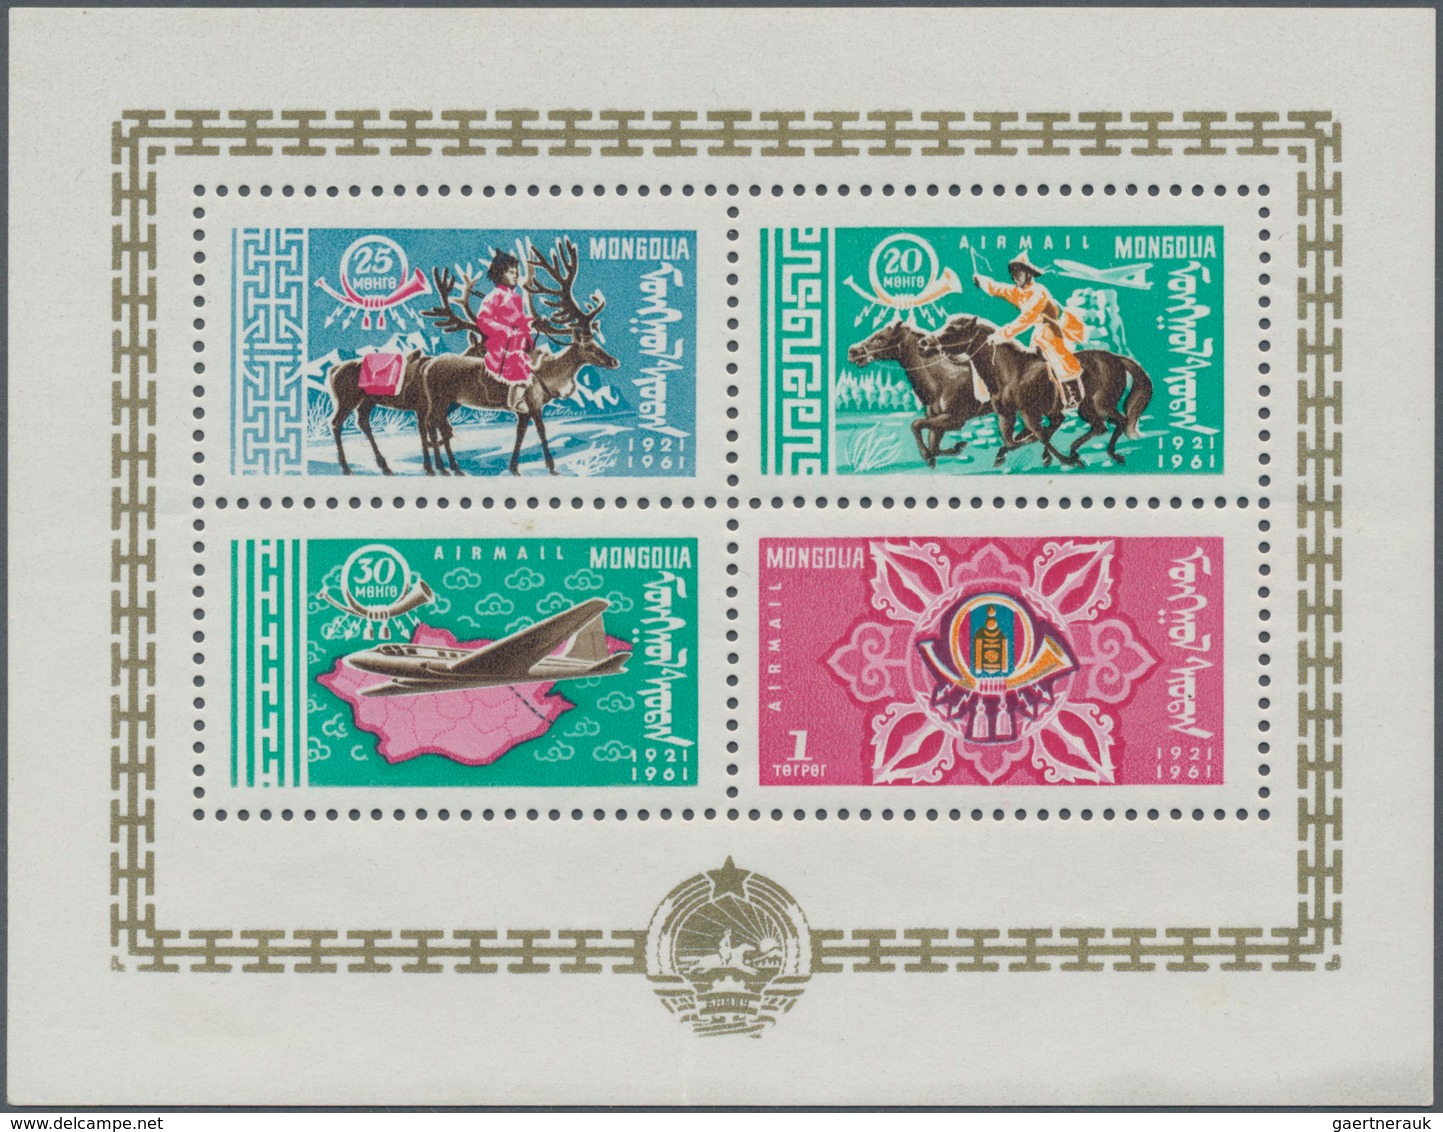 Mongolei: 1961, posts 40 years s/s #1,2 MNH and revolution 40 years s/s #3-6 ex-three with few adhes